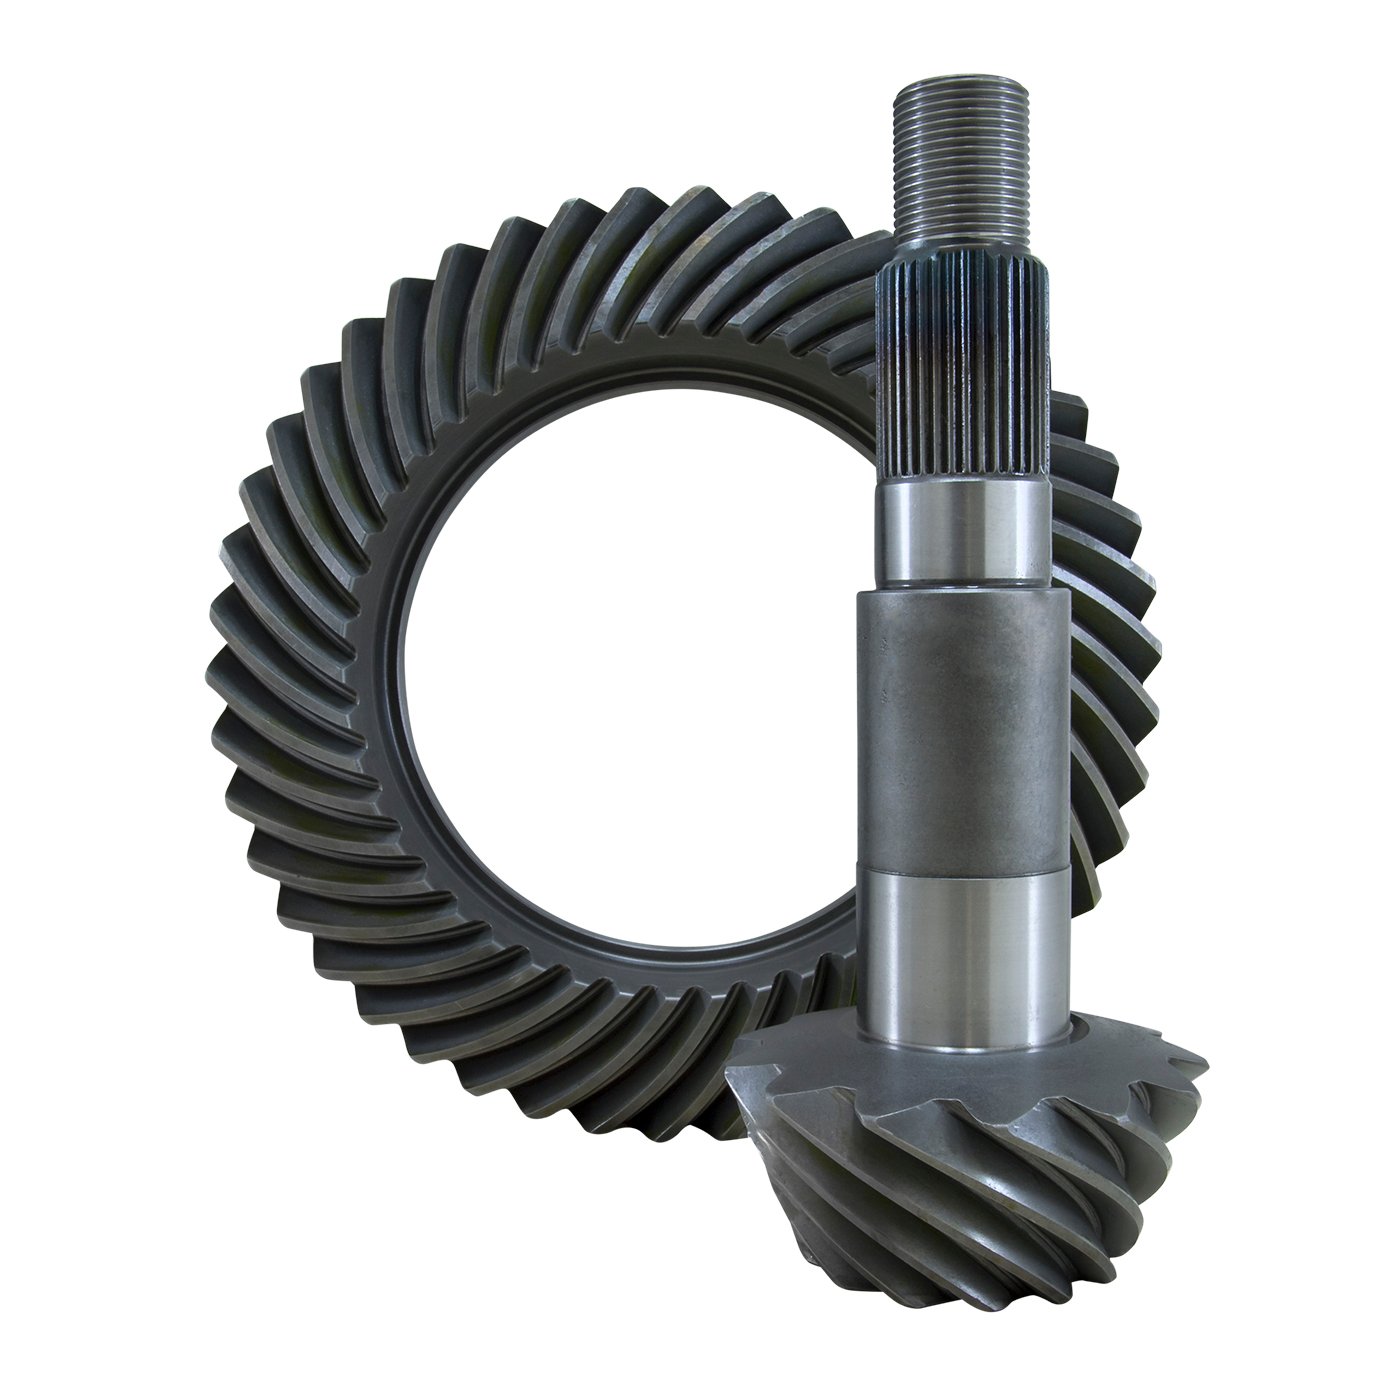 USA Standard ZG D80-411 Replacement Ring & Pinion Gear Set, For Dana 80, 4.11 Ratio